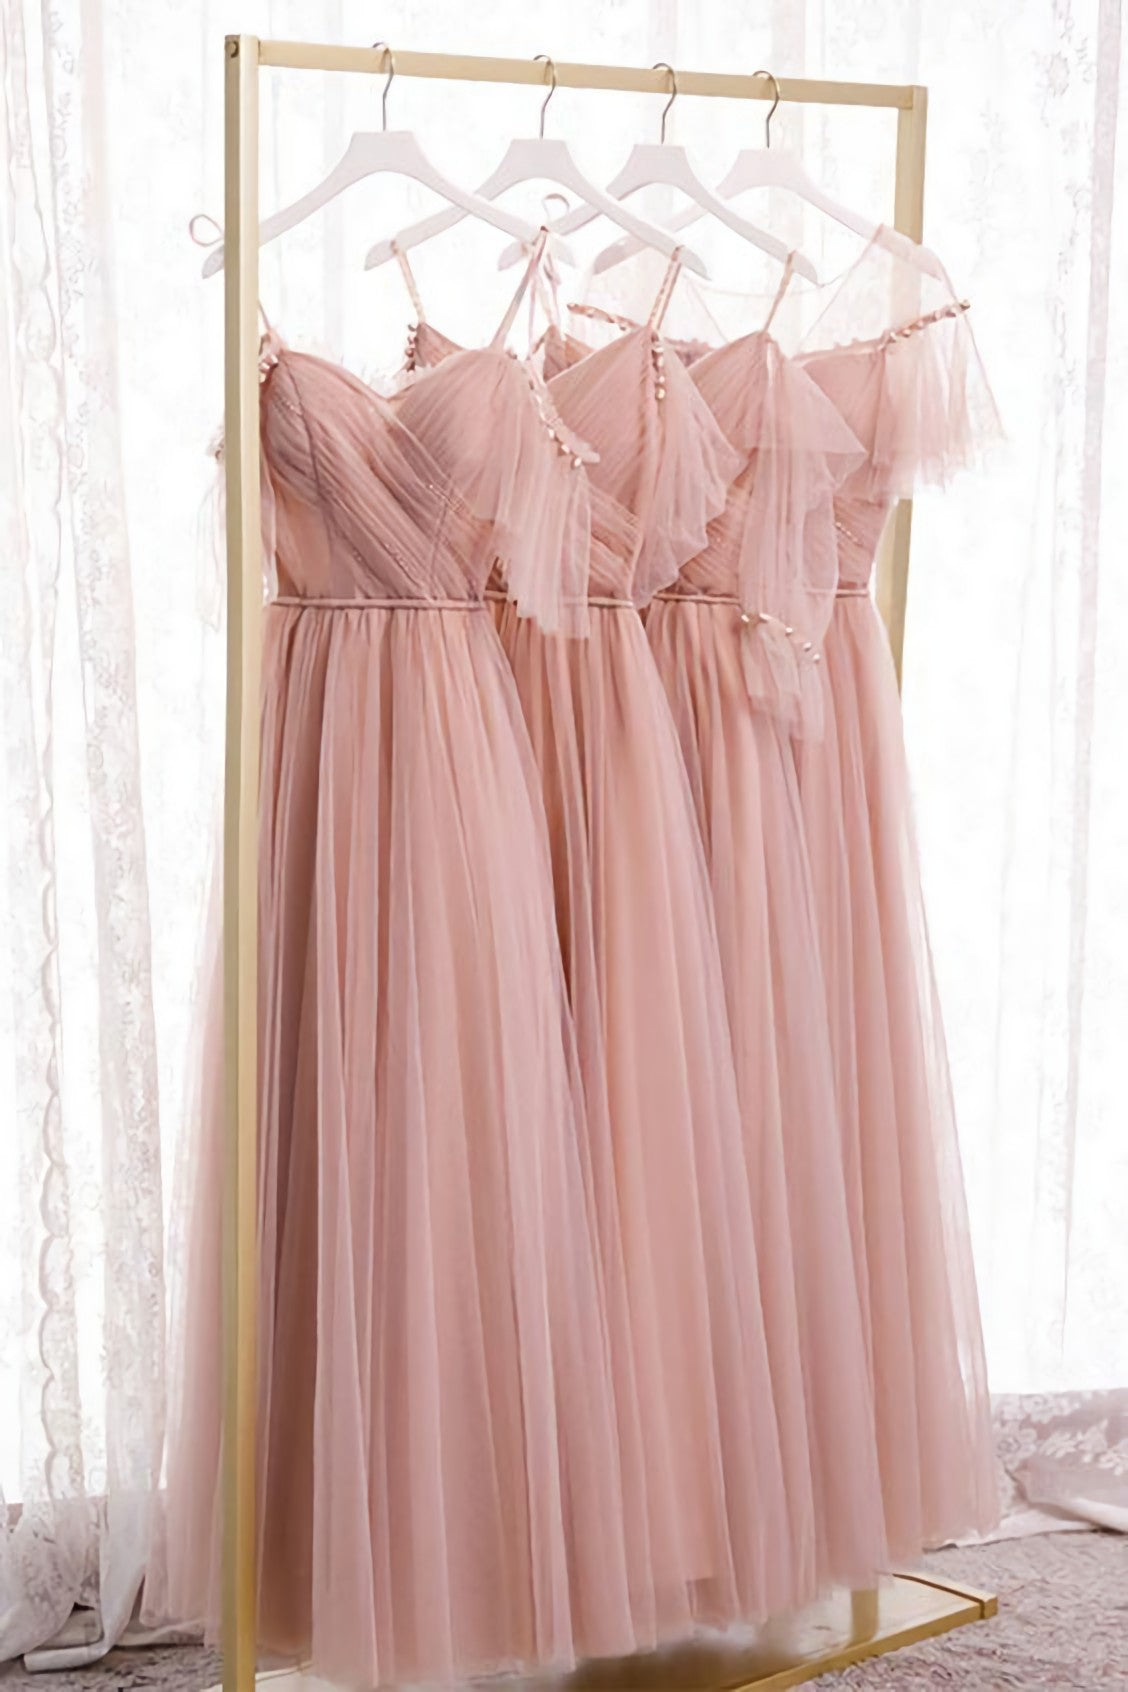 Blush Pink Tulle Long Corset Bridesmaid Dresses, Corset Prom Dress, Evening Dresses outfit, Homecoming Dresses Red